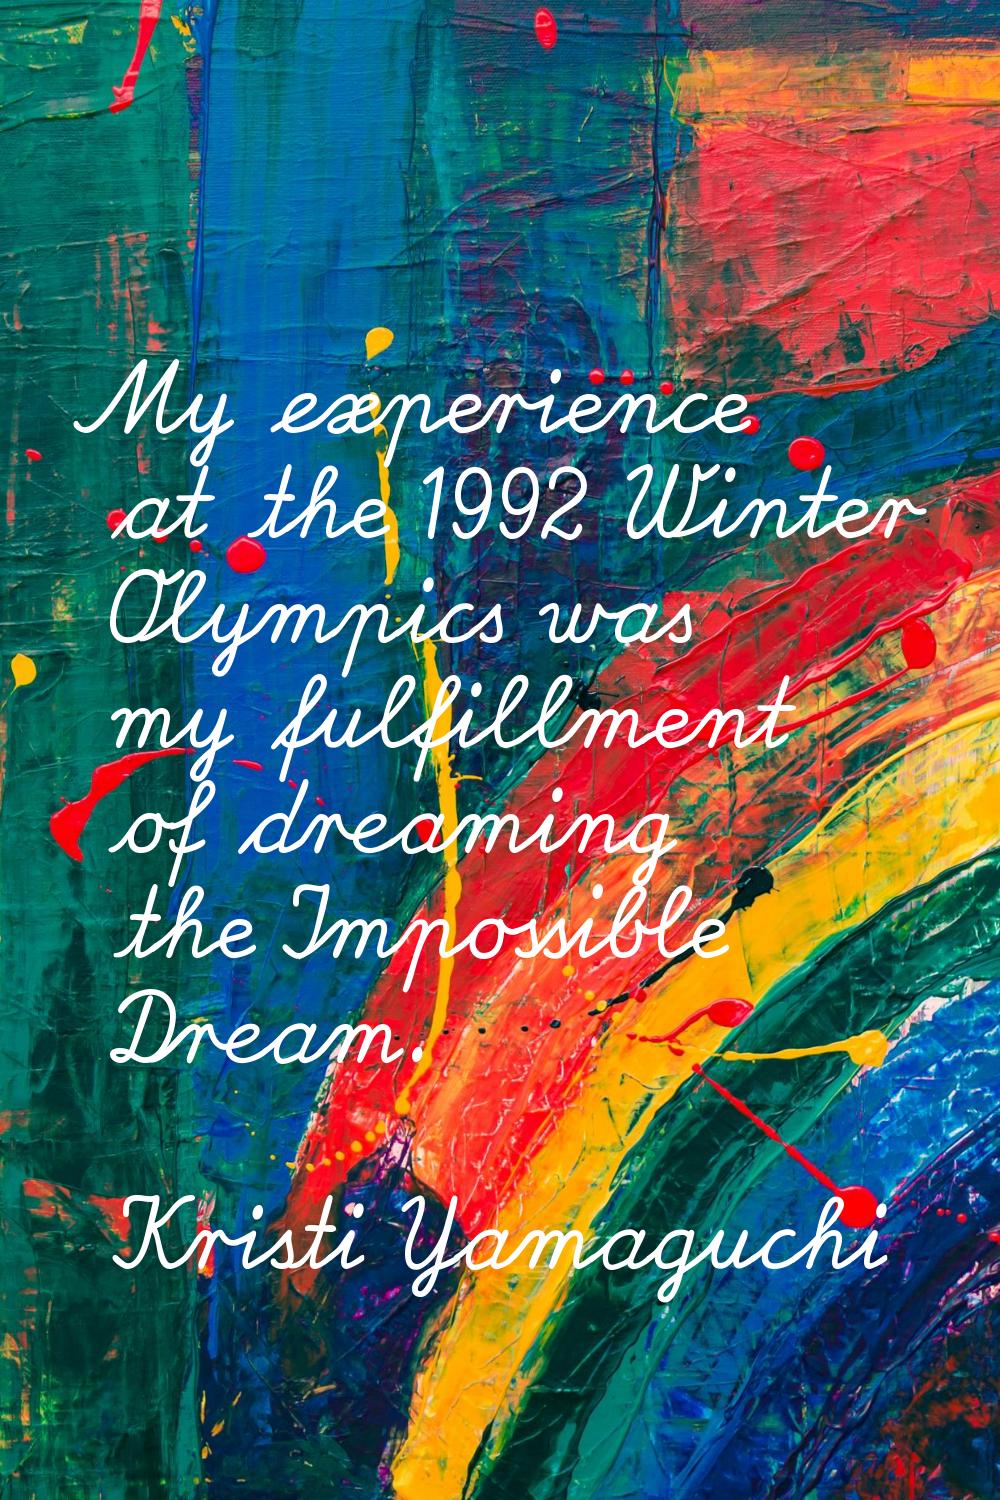 My experience at the 1992 Winter Olympics was my fulfillment of dreaming the Impossible Dream.